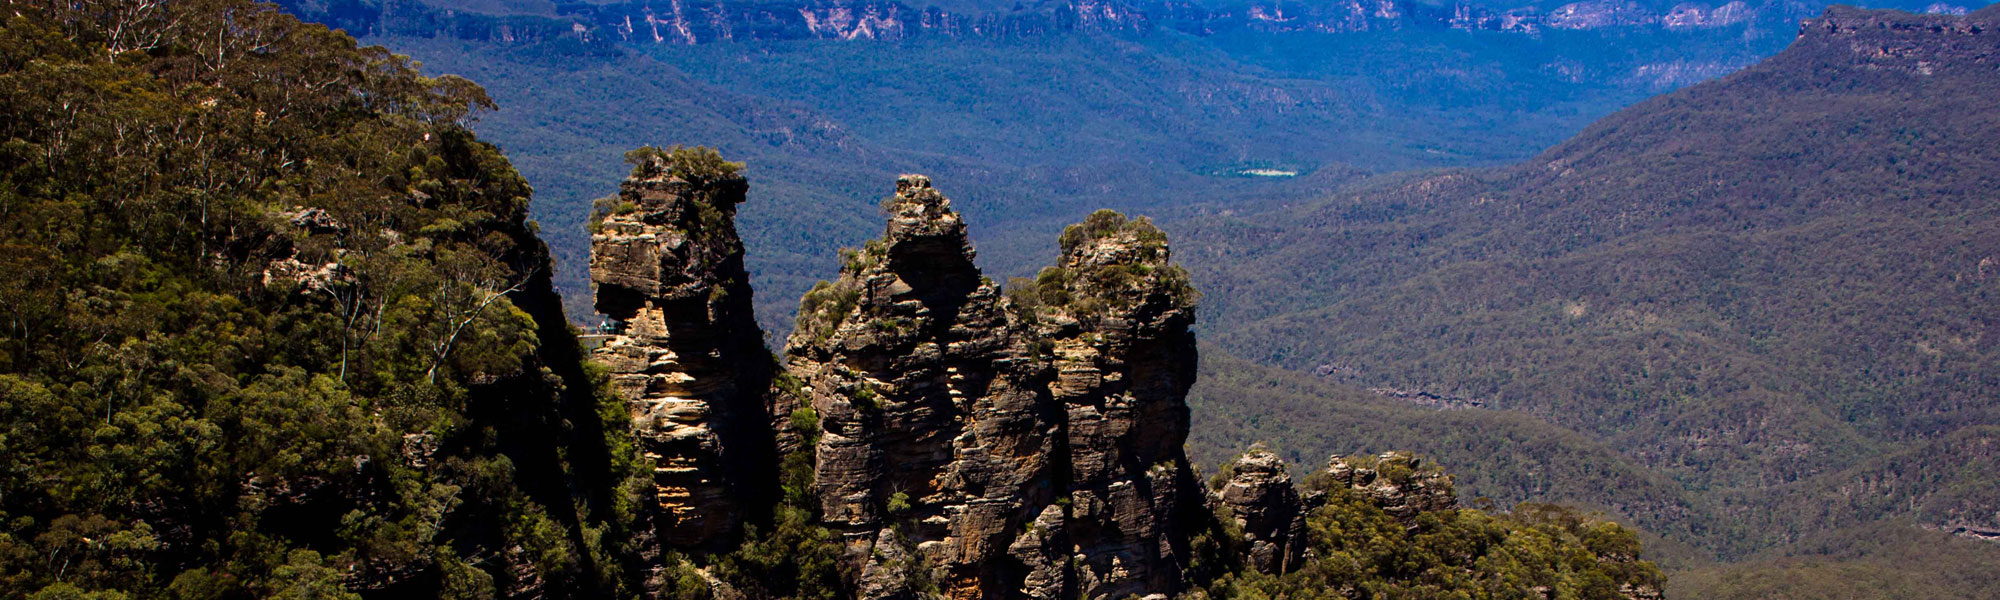 5 thINGS TO DO WHEN VISITING THE bLUE mOUNTAINs